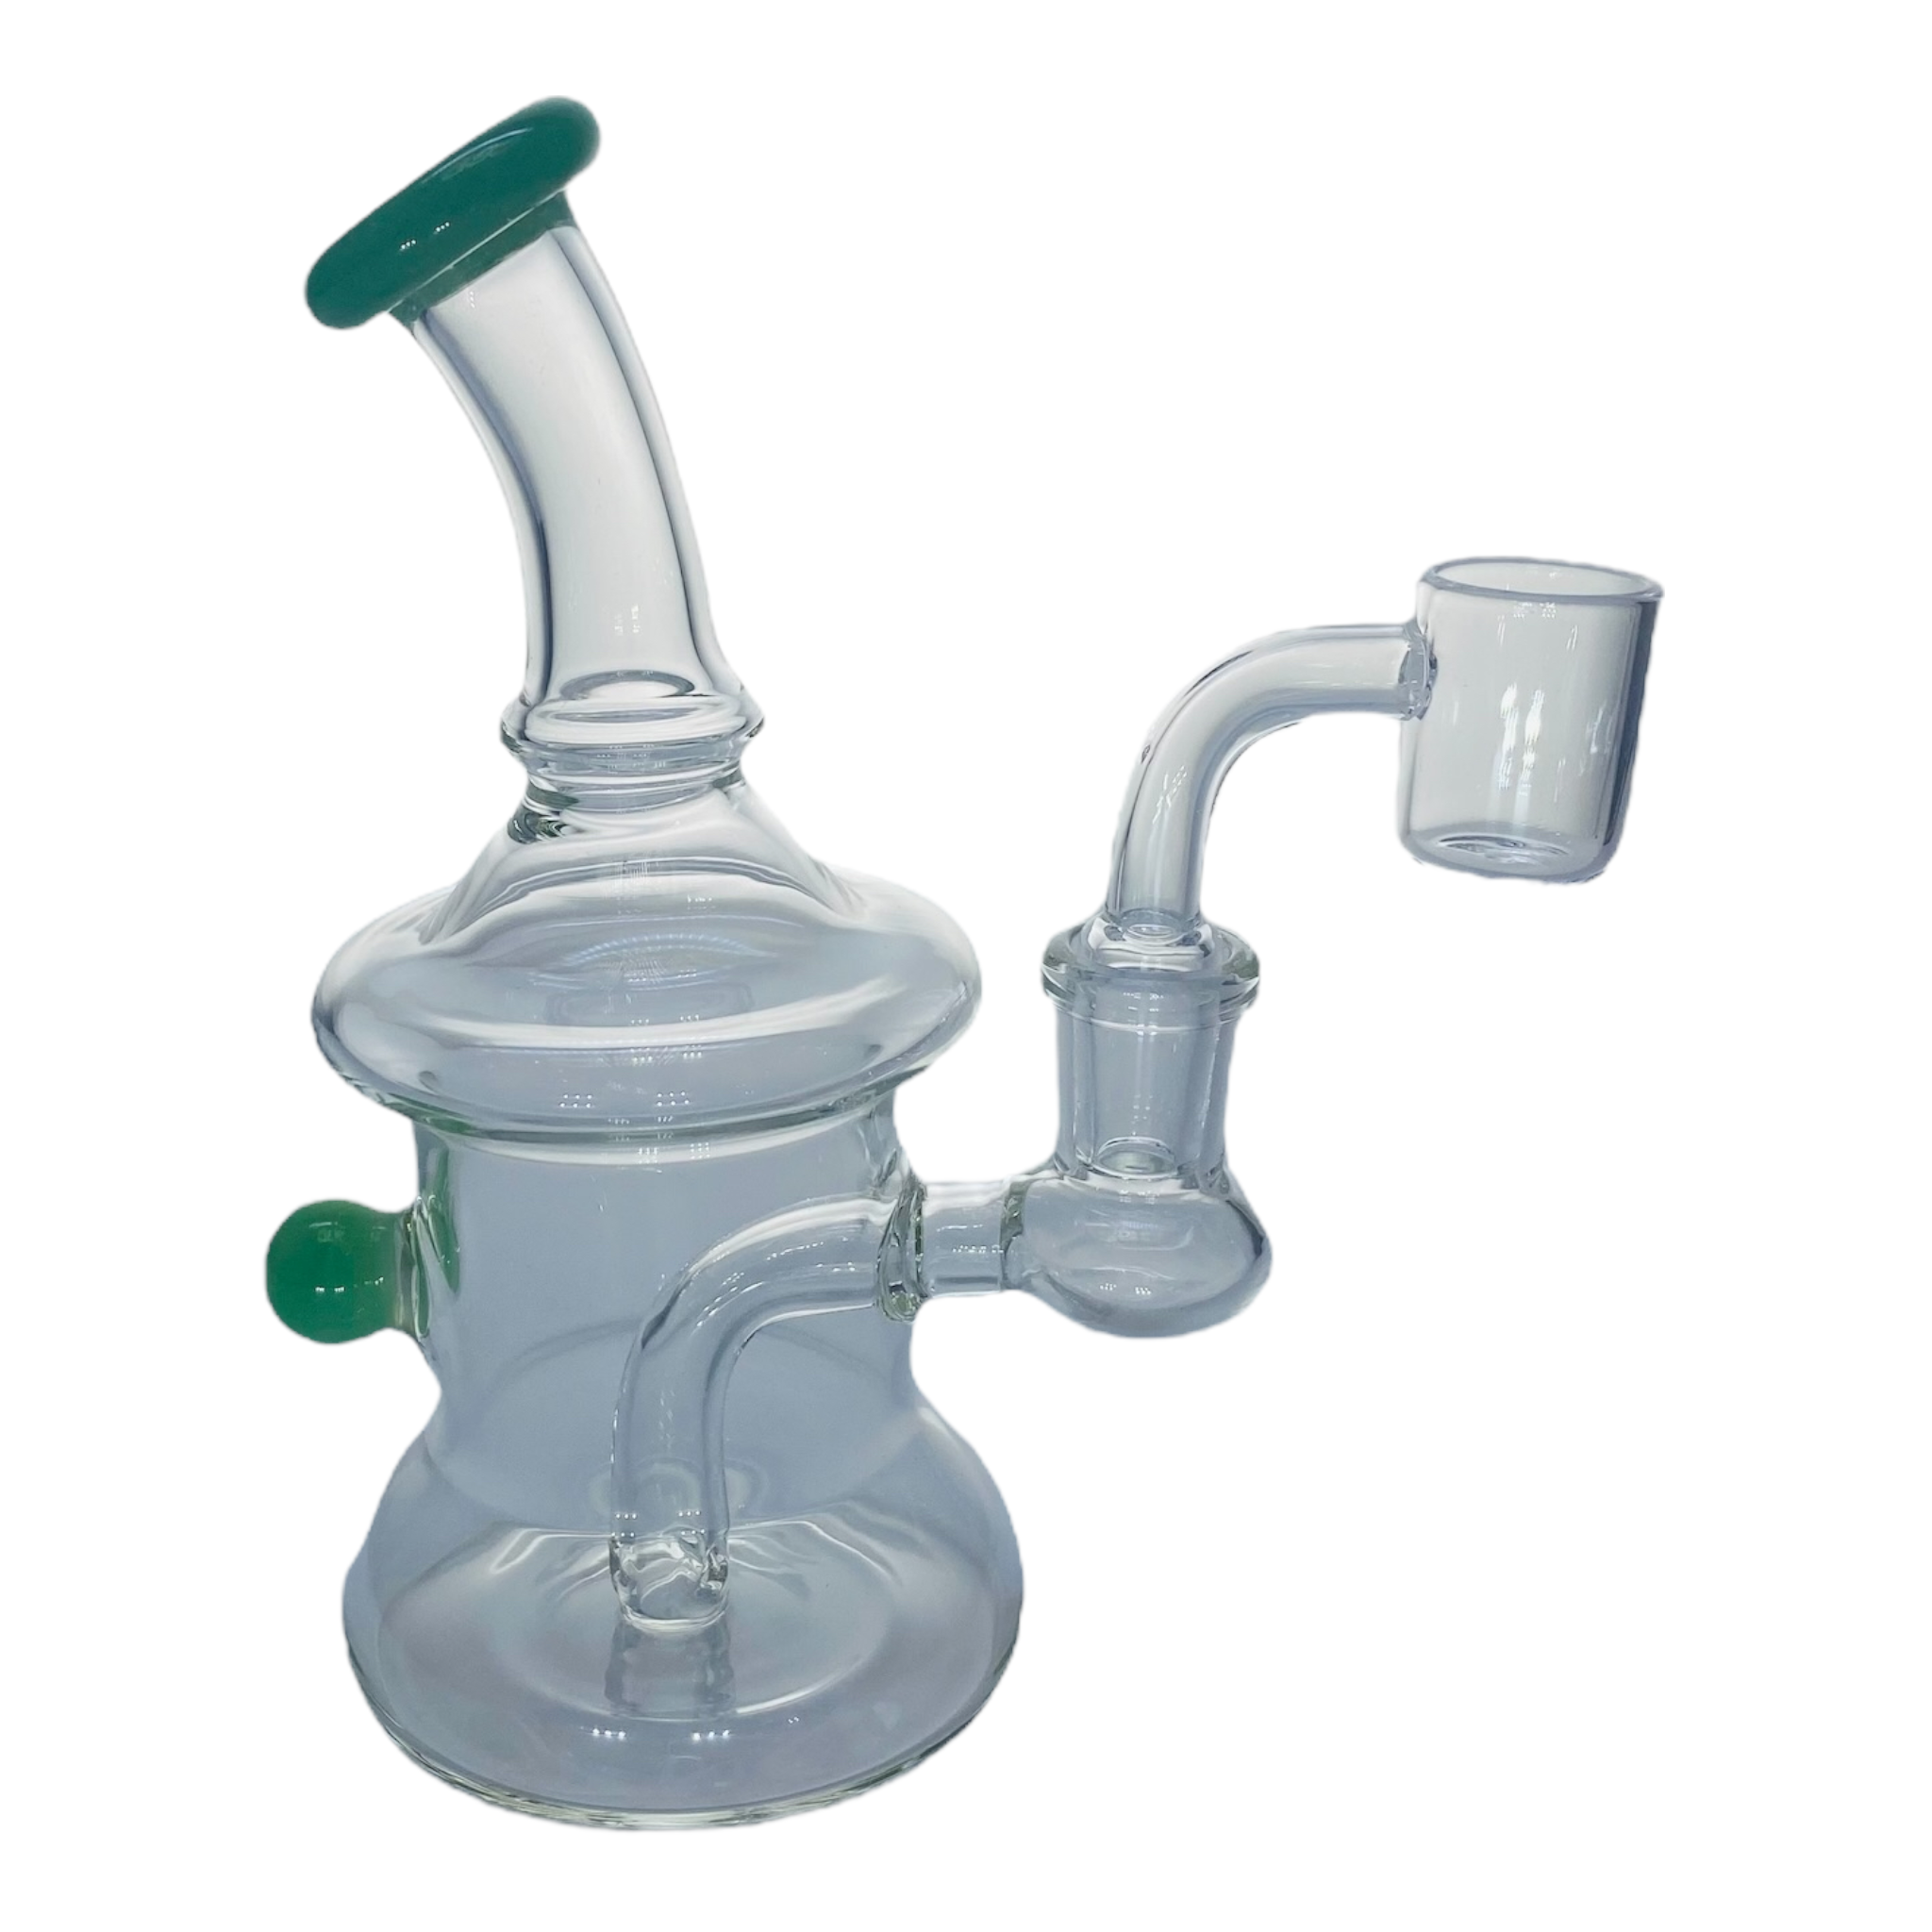 Explore our selection of the highest quality Small Dab Rigs and Recyclers